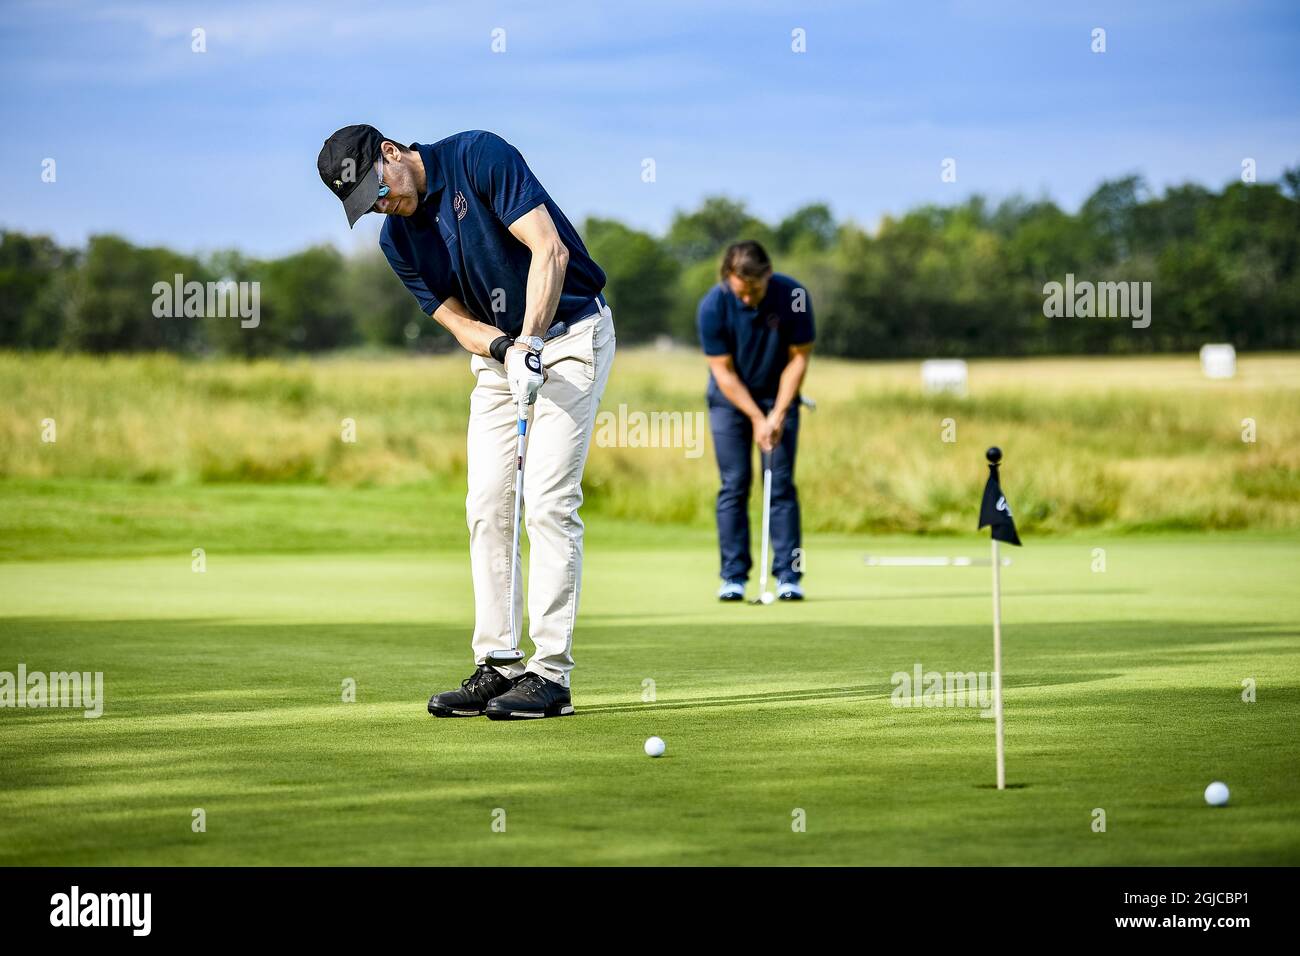 Page 7 - Alex Daniel High Resolution Stock Photography and Images - Alamy